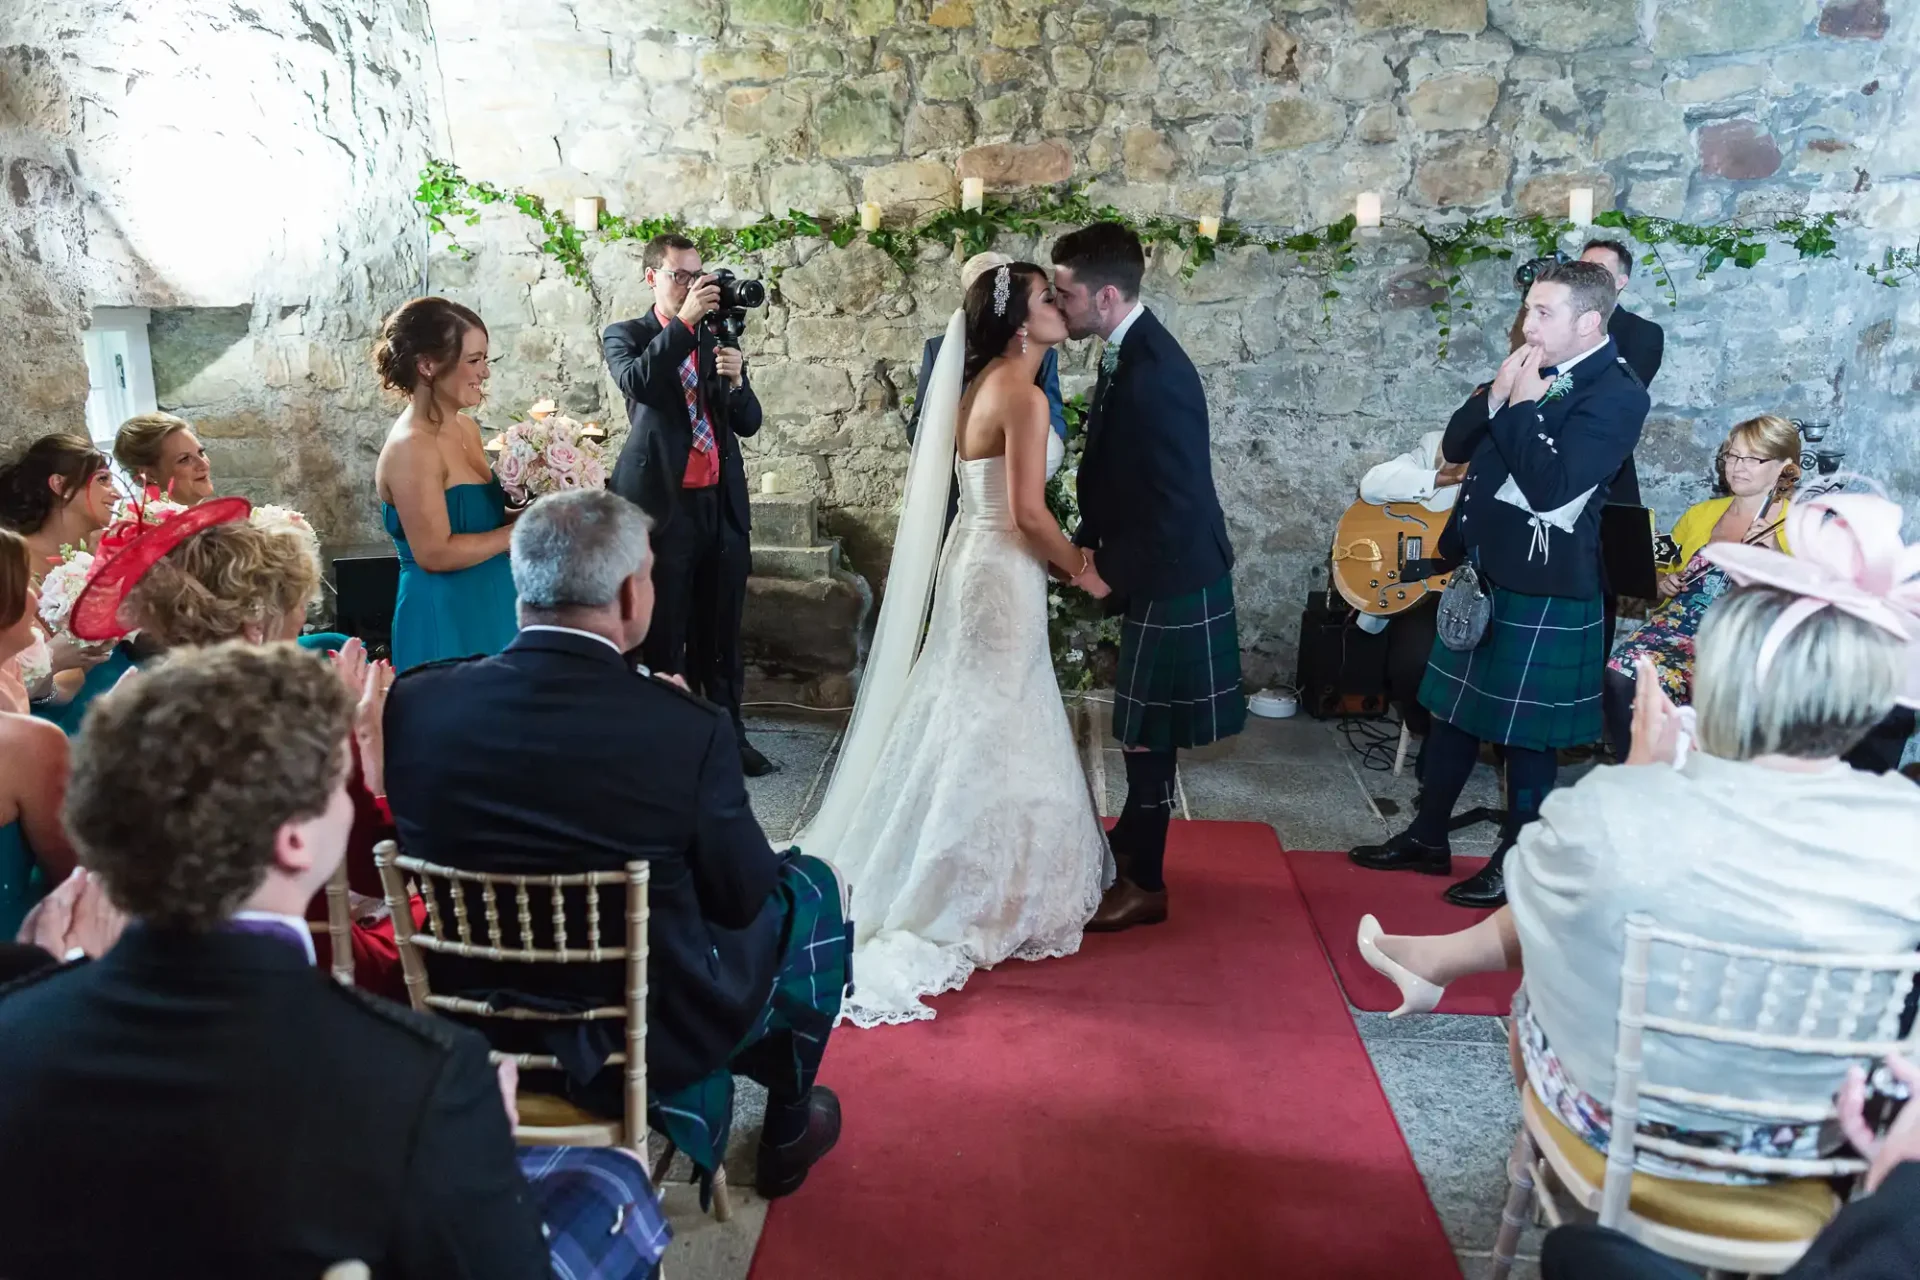 A bride and groom kiss during their wedding ceremony in a rustic stone hall, surrounded by guests and musicians wearing kilts.